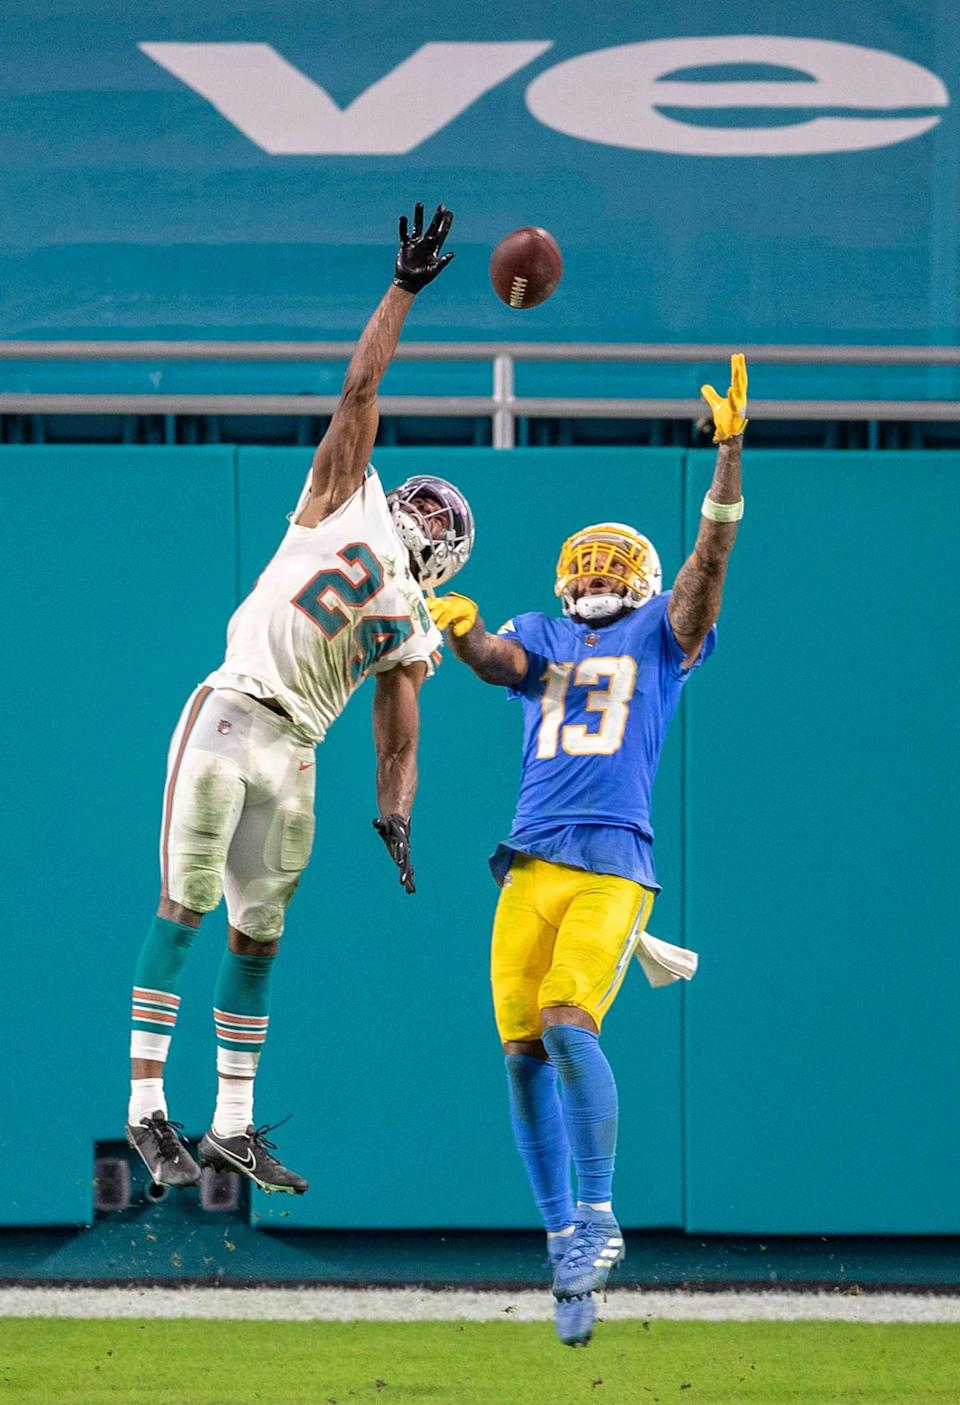 Dolphins cornerback Byron Jones deflects a pass intended for Chargers receiver Keenan Allen during a game last season.